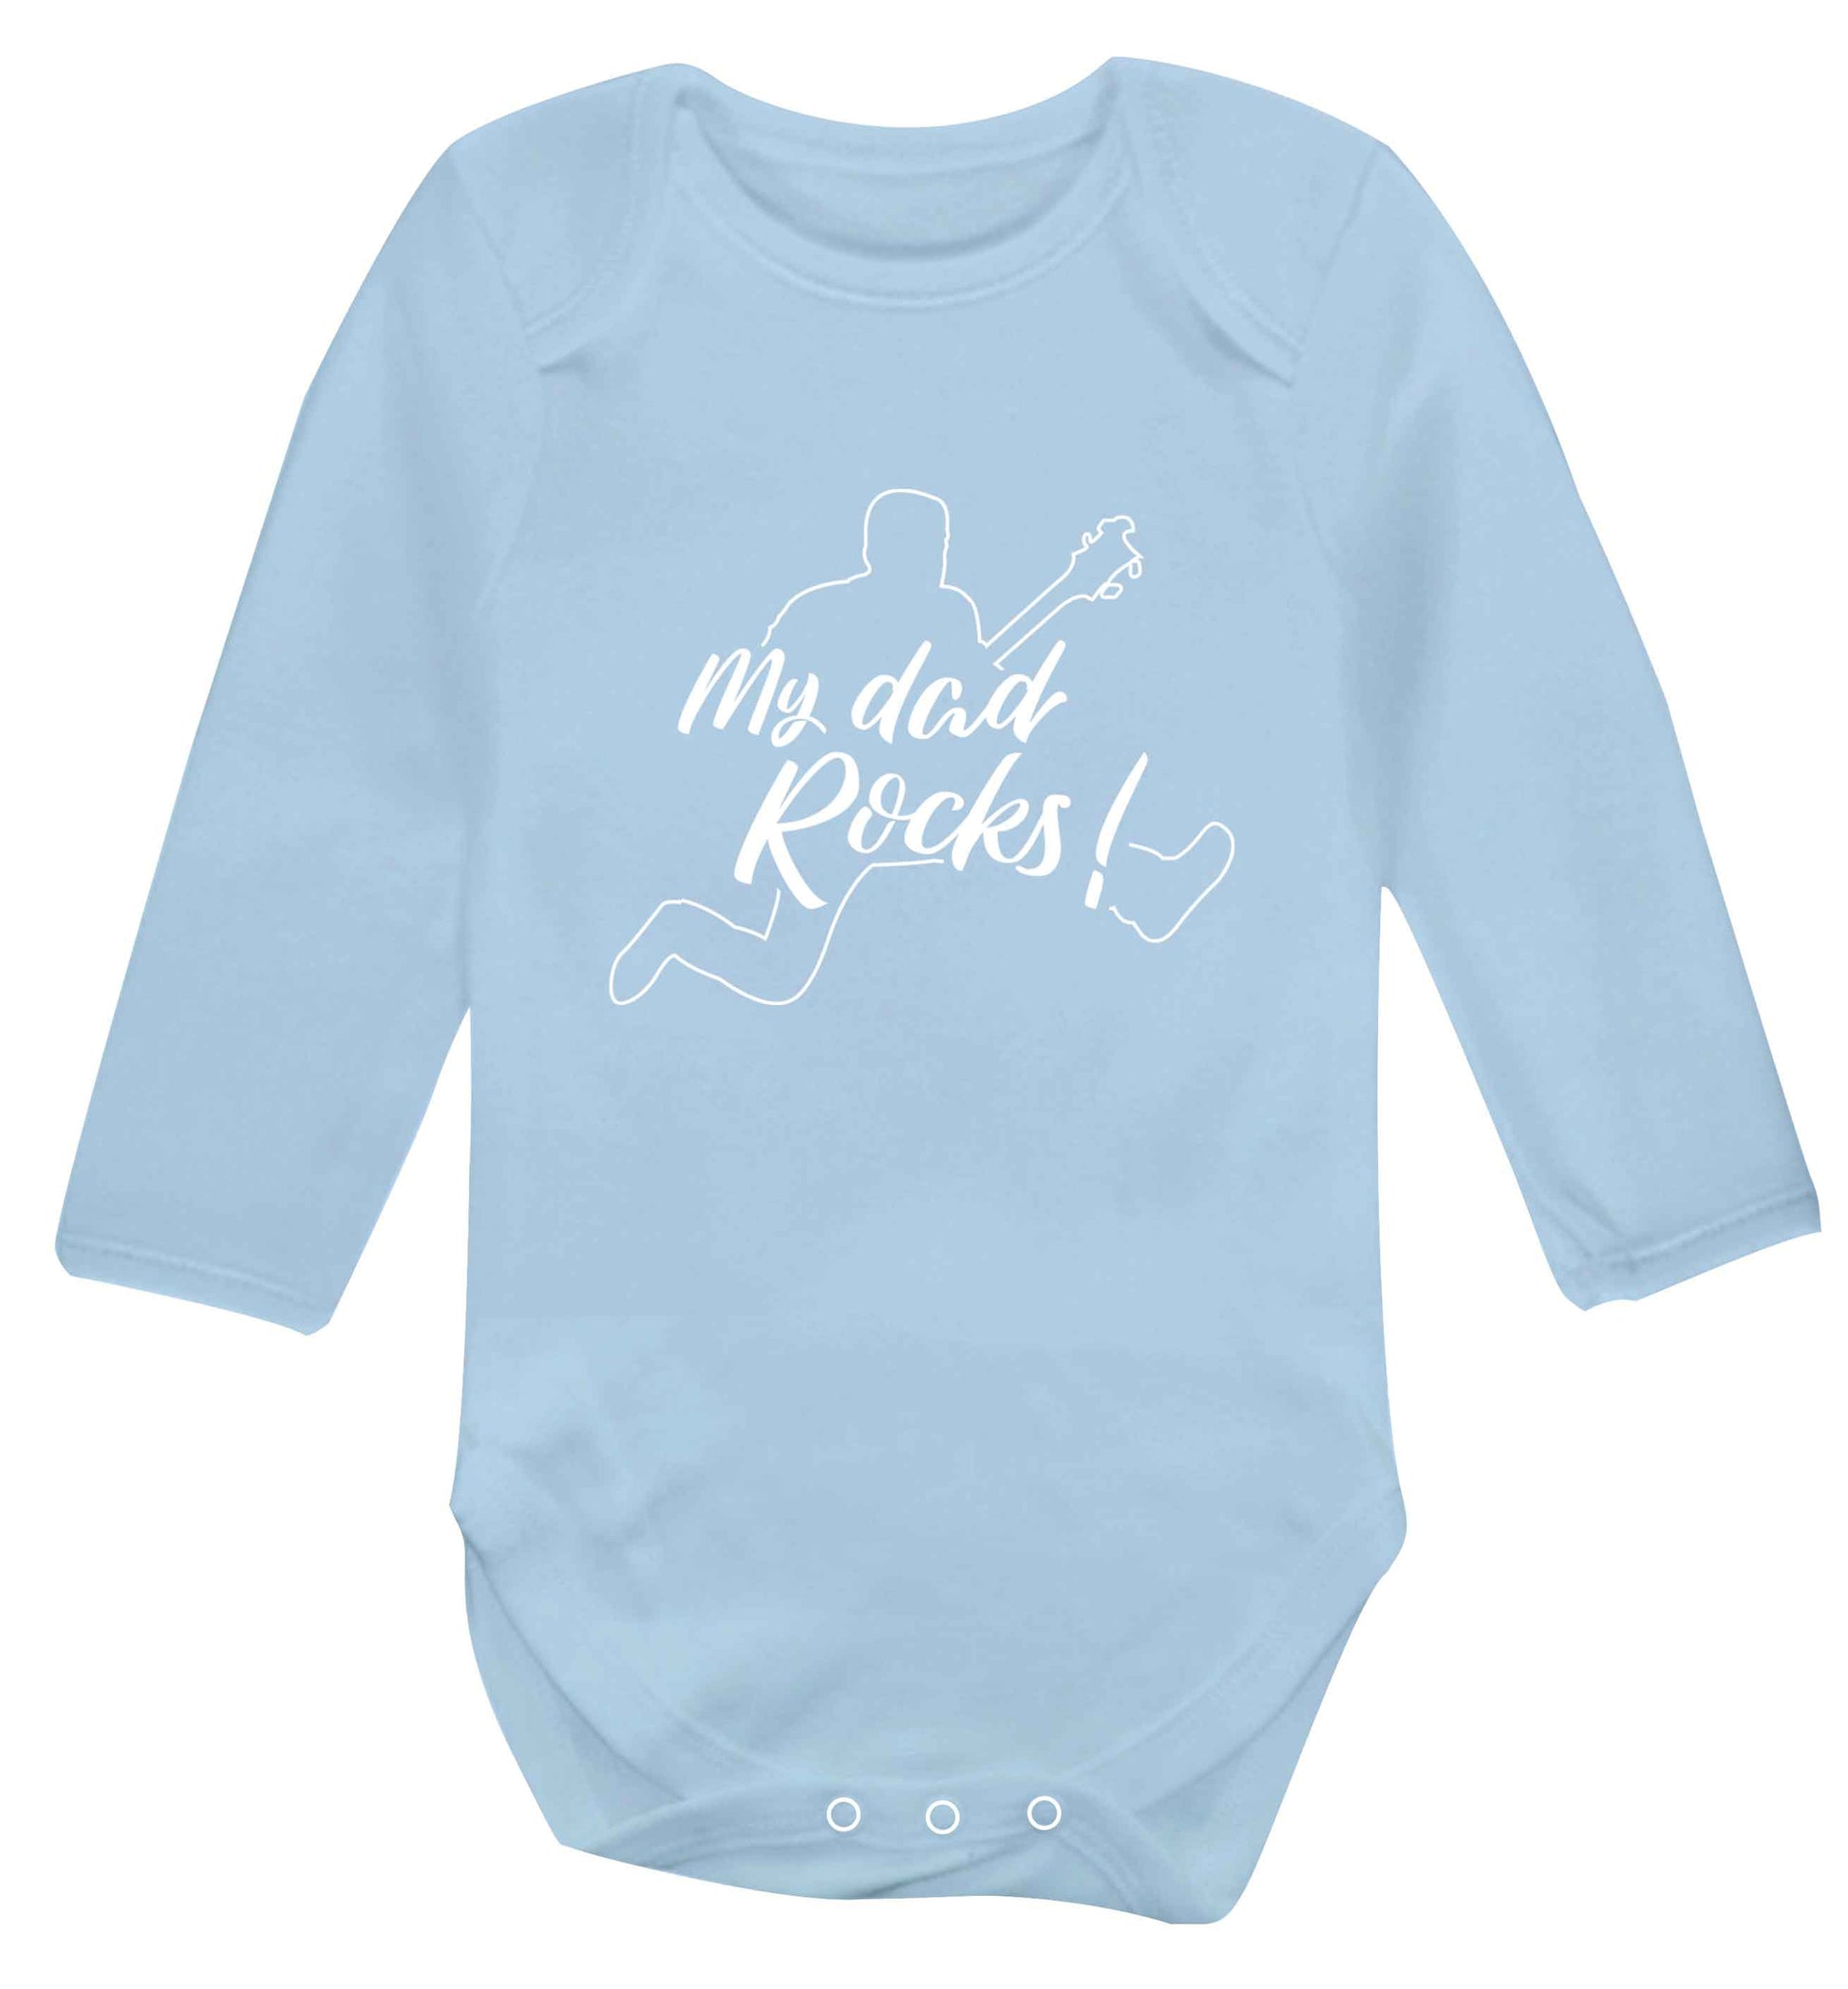 My Dad rocks baby vest long sleeved pale blue 6-12 months